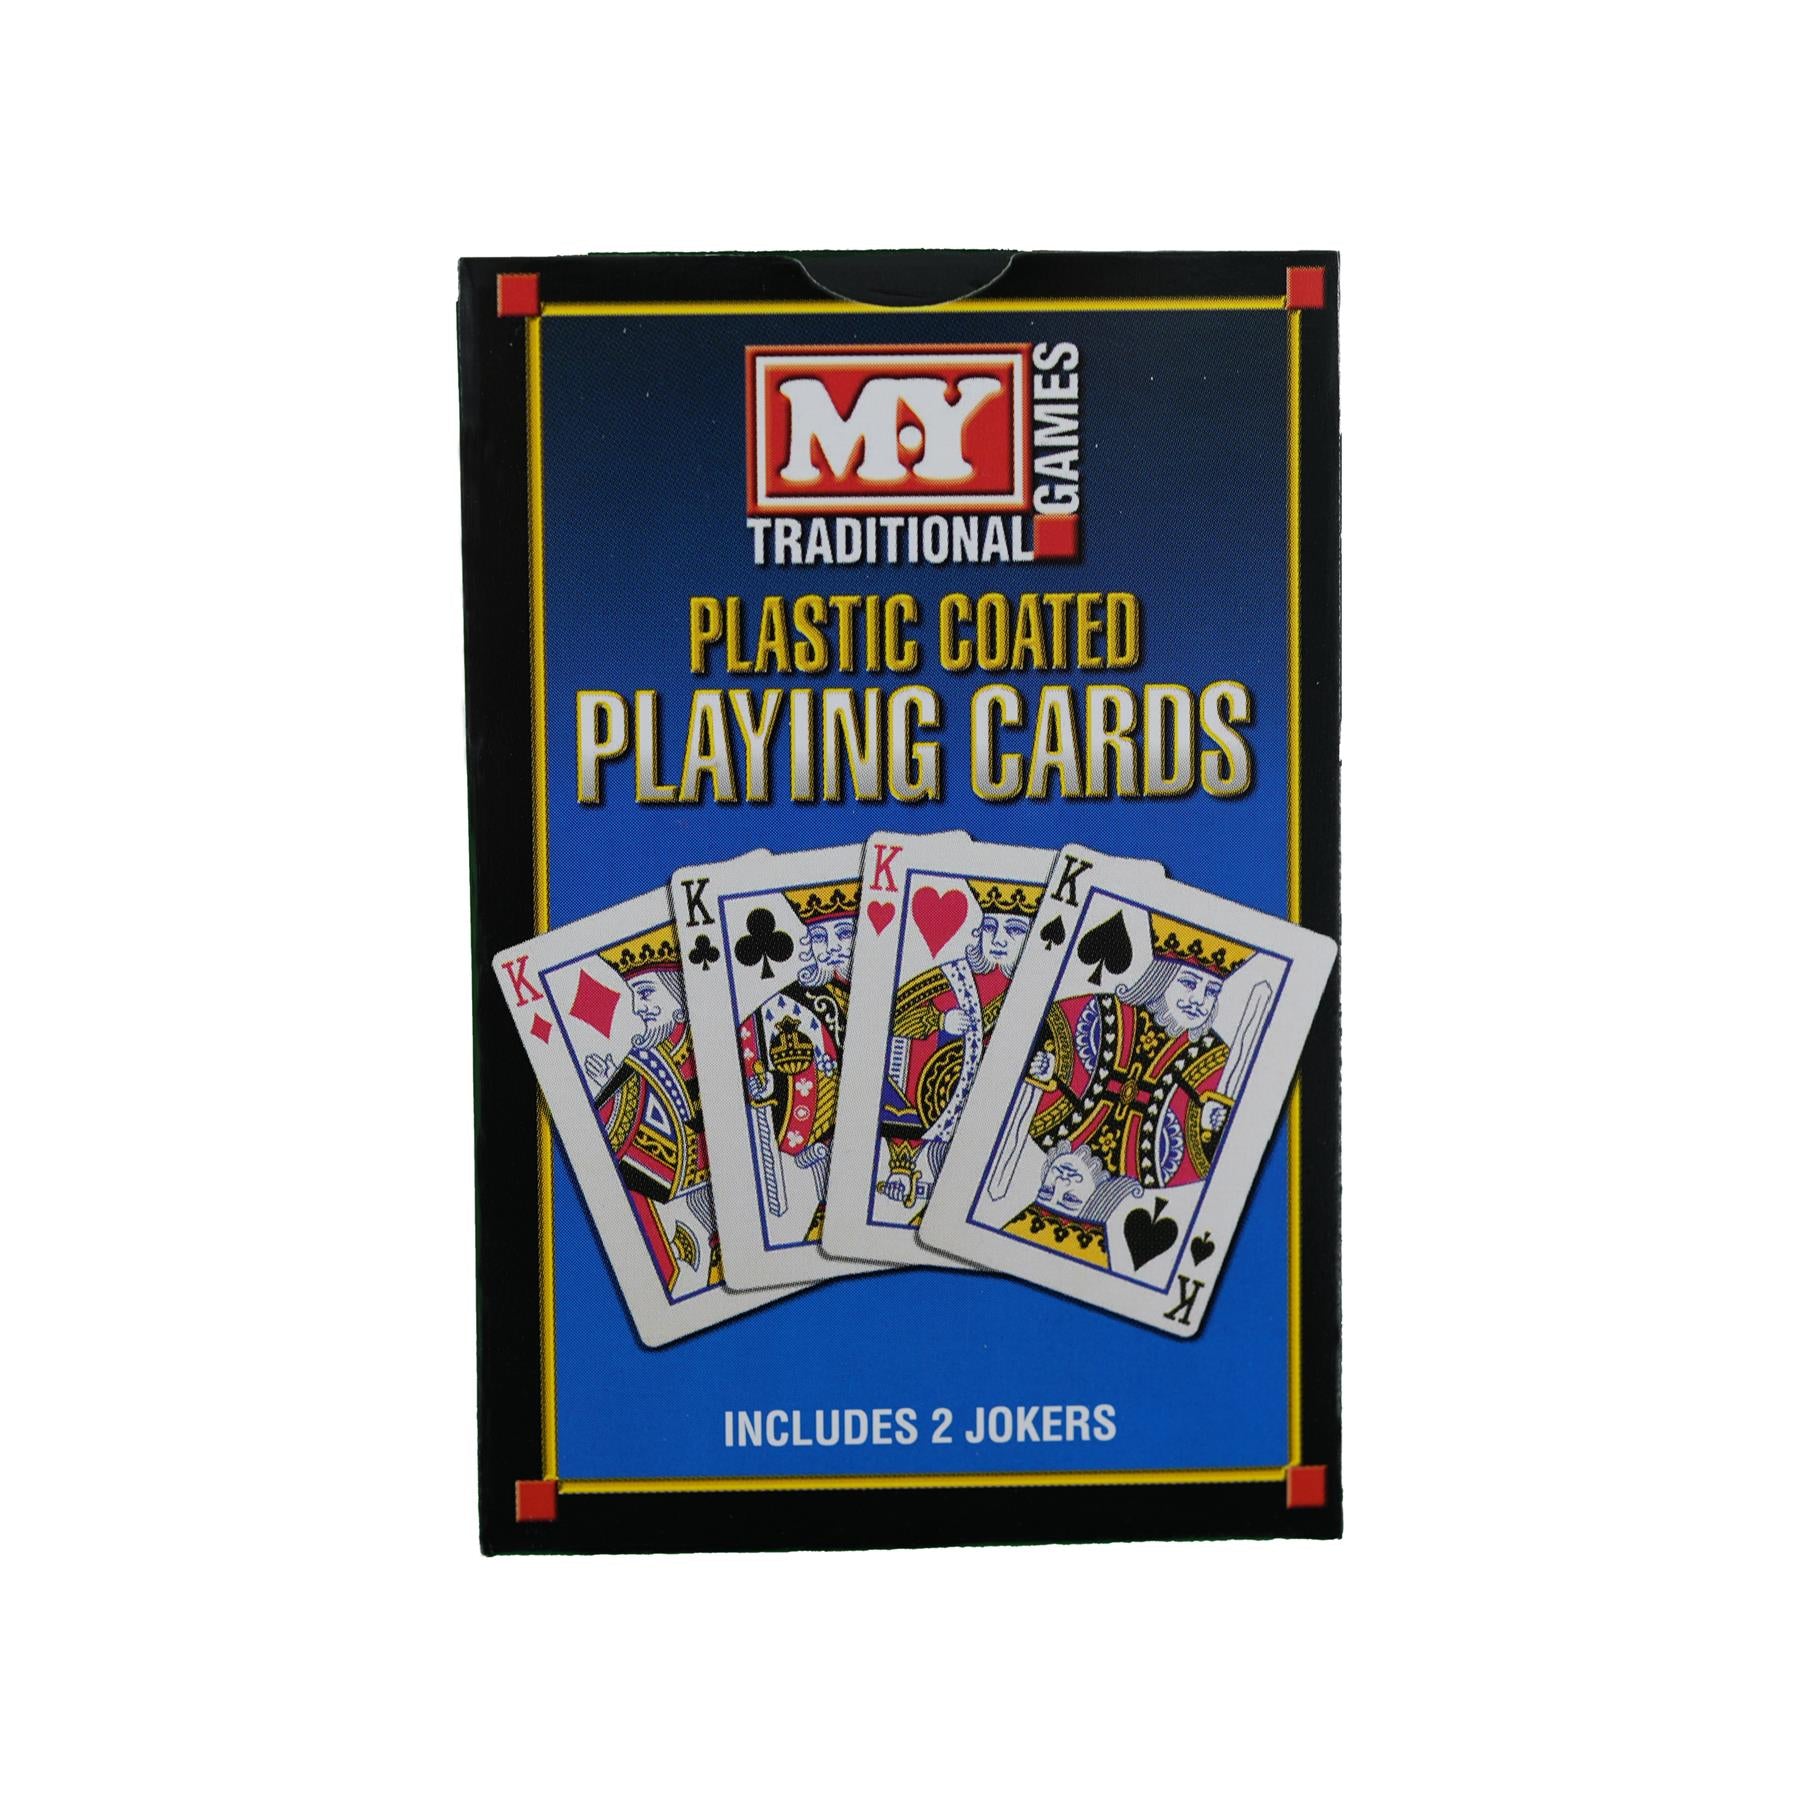 Deck of Classic Playing Cards by The Magic Toy Shop - The Magic Toy Shop